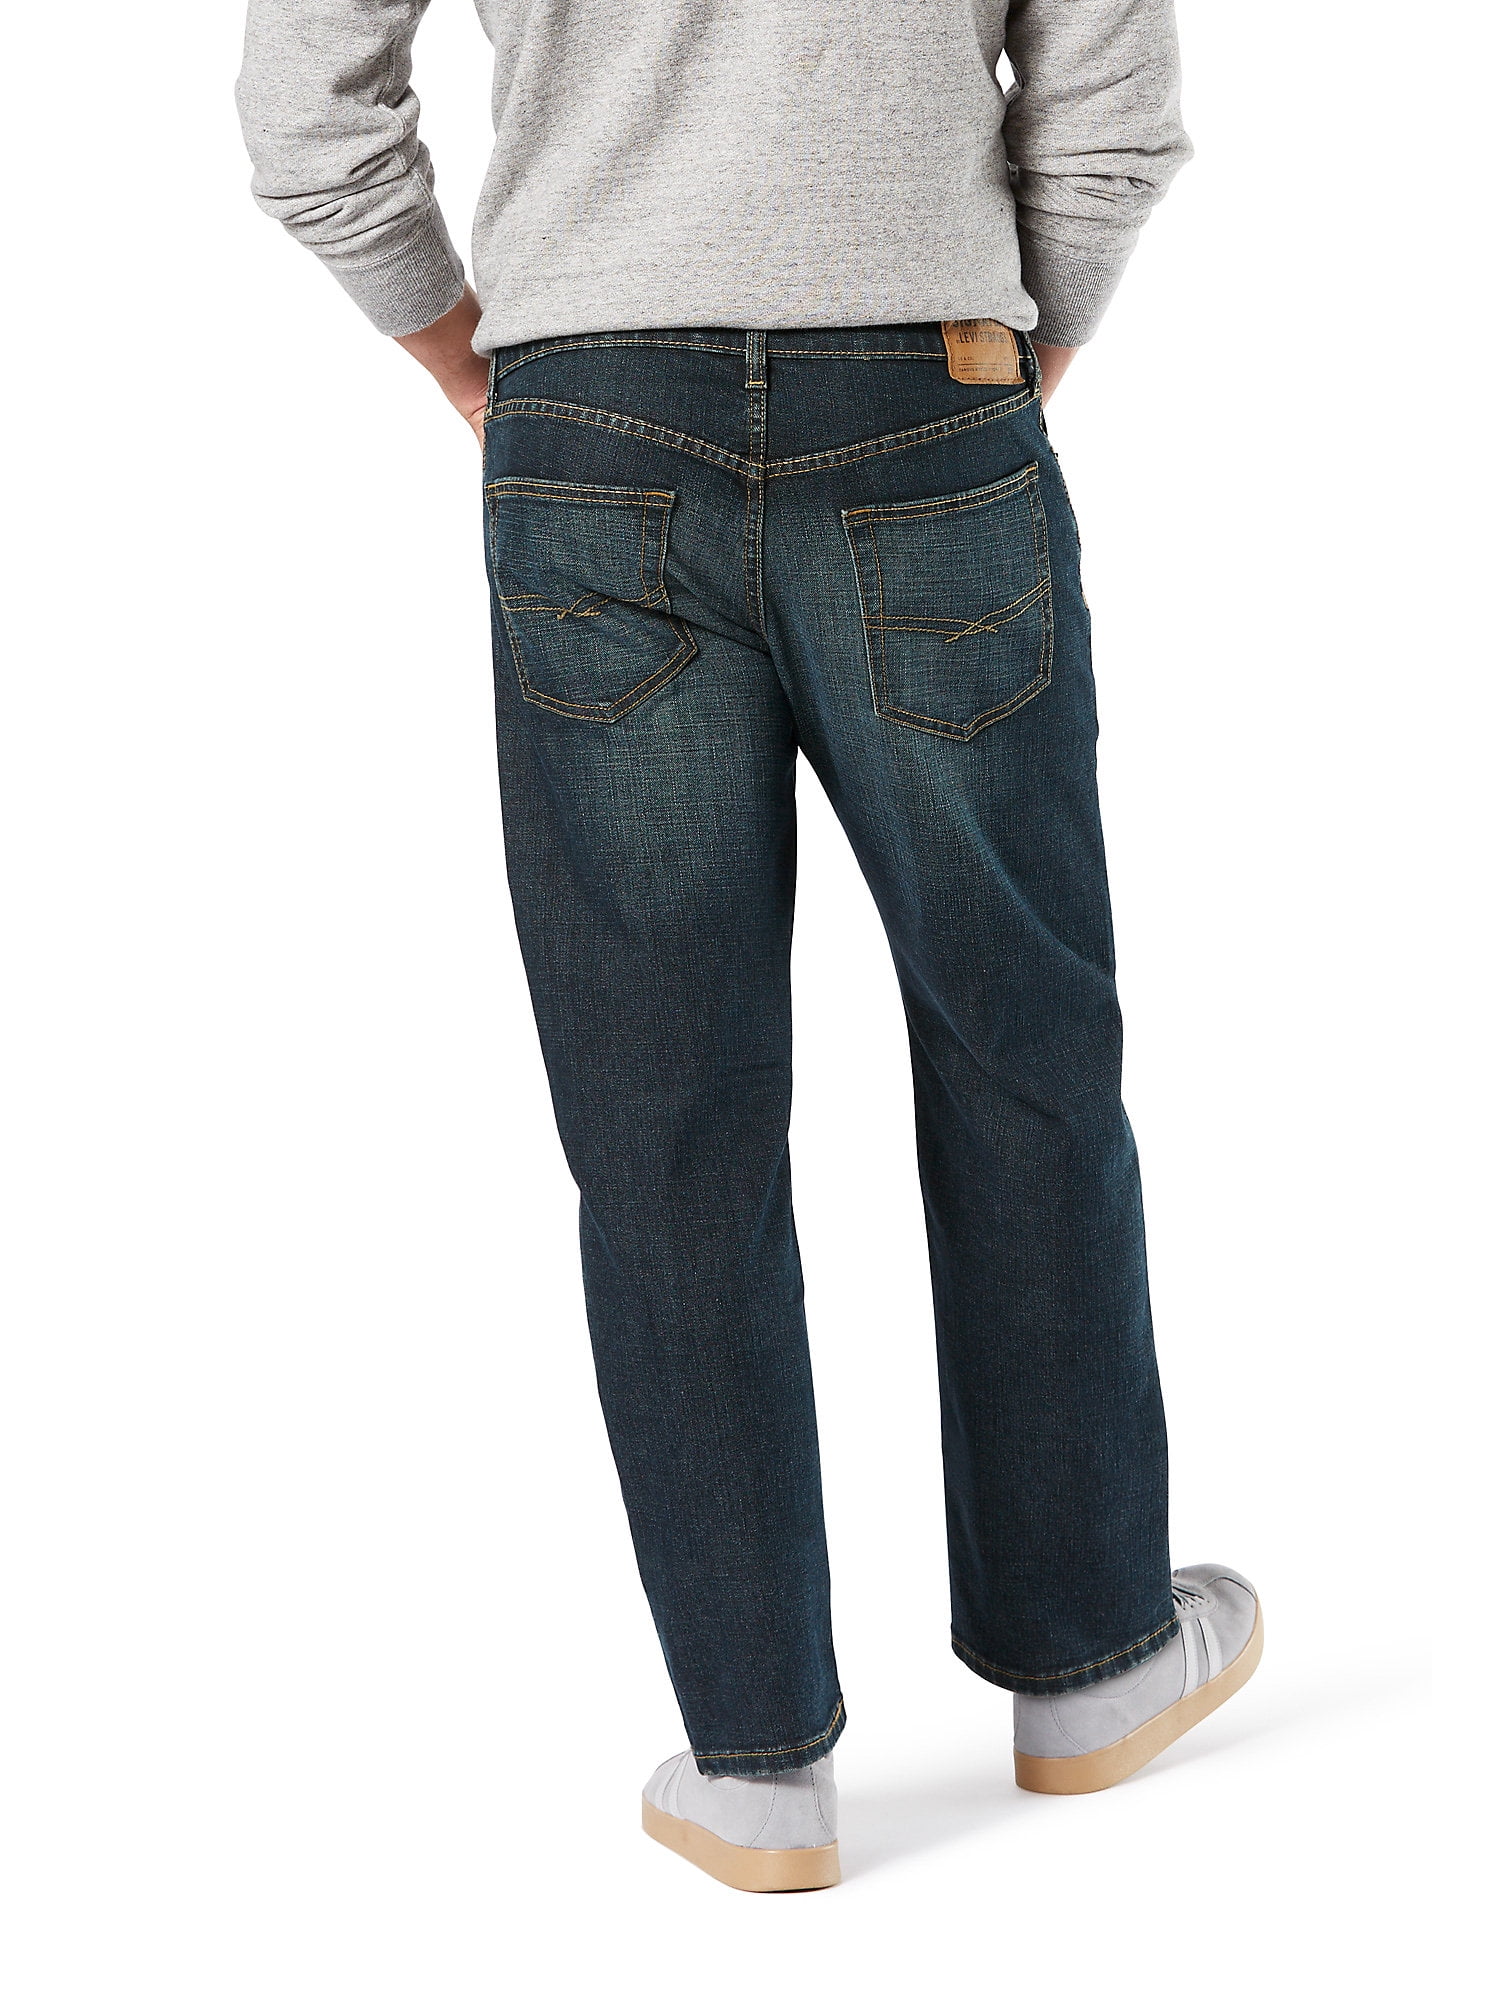 Signature by Levi Strauss & Co. Men's Relaxed Fit Jeans 